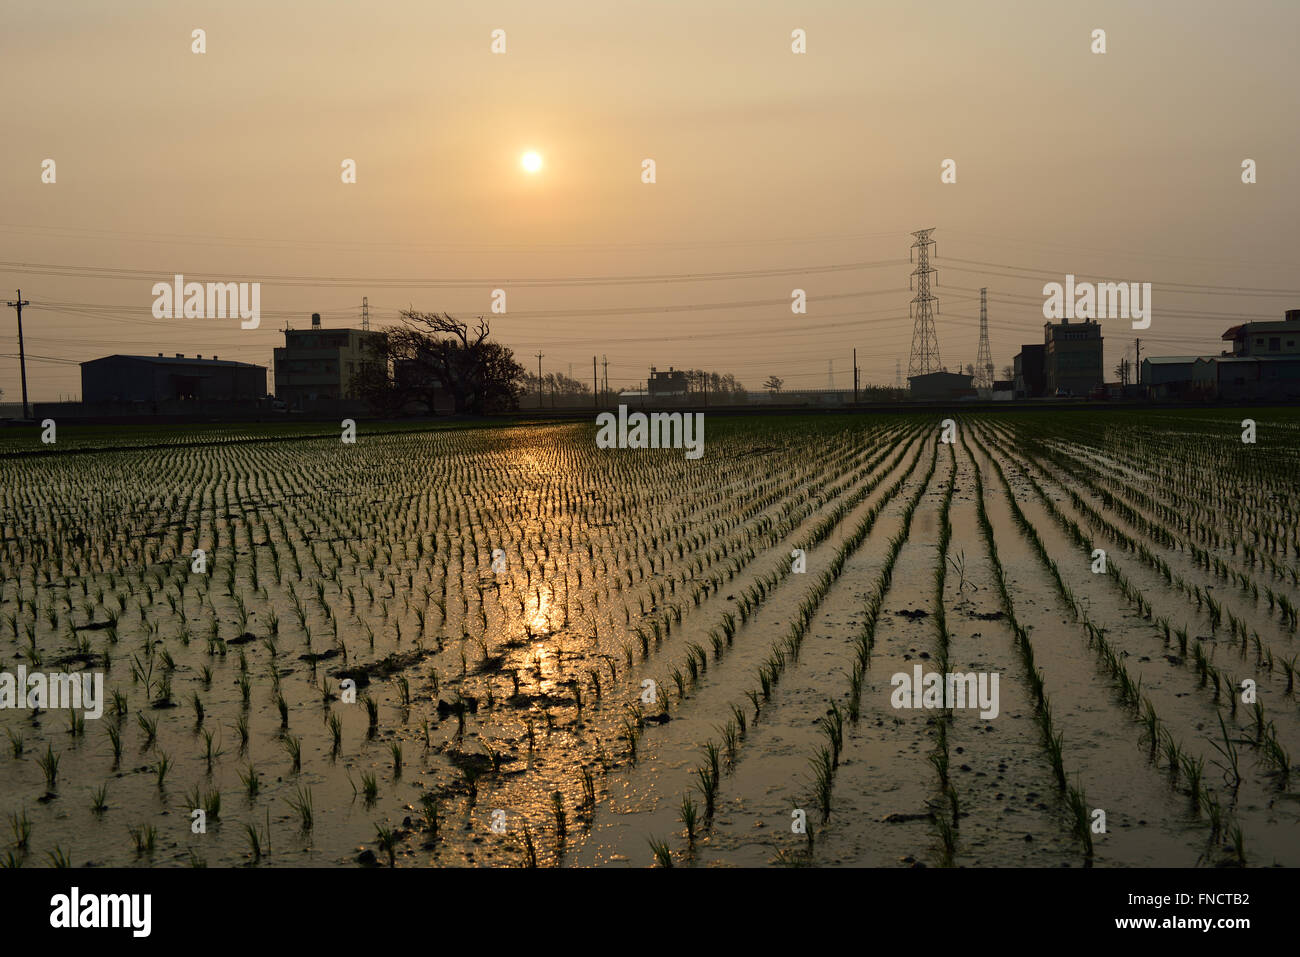 Country Life of Transplant rice seedlings Stock Photo